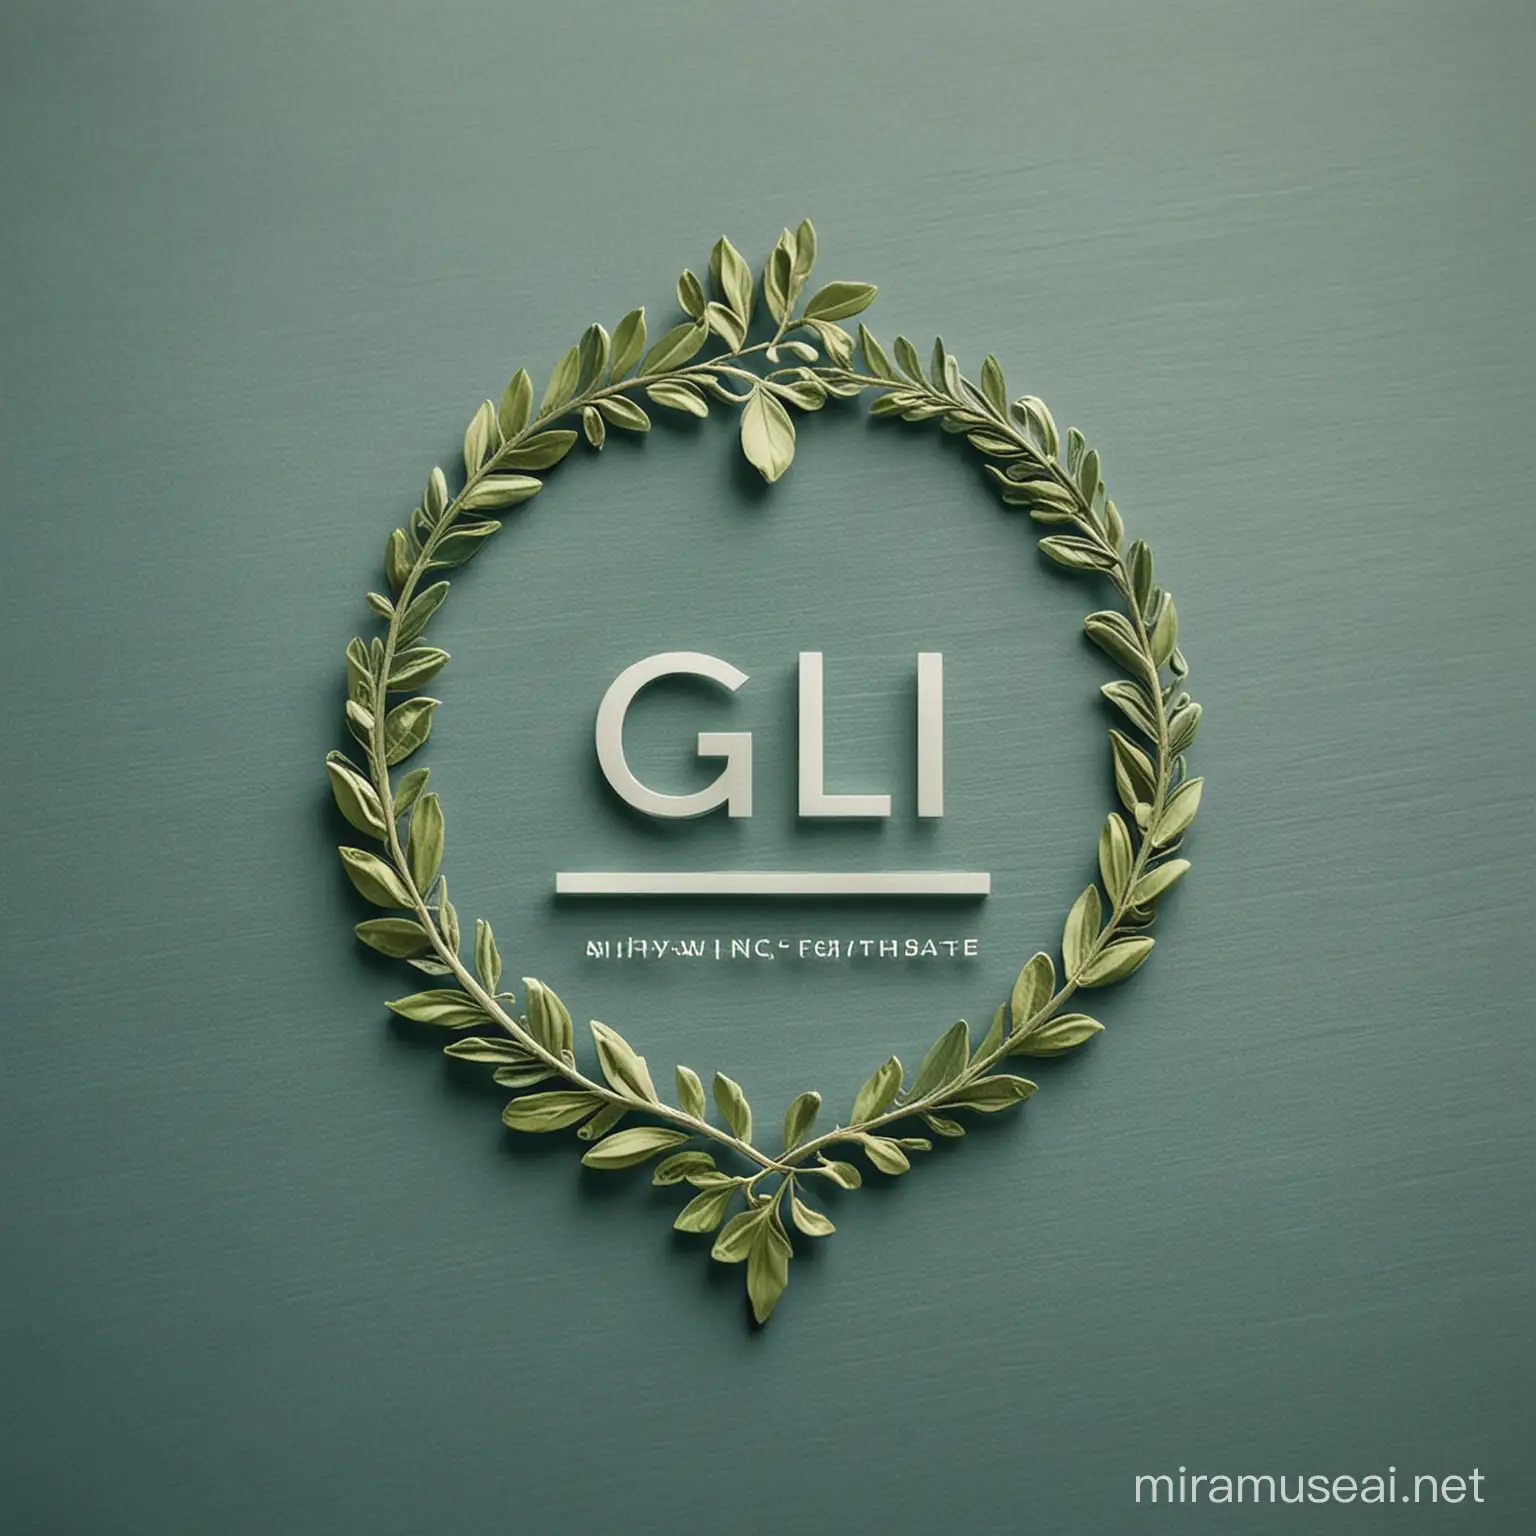 Logo Design:
Use the letters "GL" in a unique and artistic way, perhaps intertwining them or forming a stylized emblem.
Incorporate subtle elements like leaves or a small house within the design to represent the company's focus on nature, real estate, and sustainability.
Opt for a sleek and modern font for "Green Life Incorporated" to maintain a professional look.
Color Palette:
Green: Symbolizing nature, growth, and sustainability.
Blue: Representing trust, stability, and professionalism.
Brown: Adding an earthy tone, suitable for real estate and agriculture.